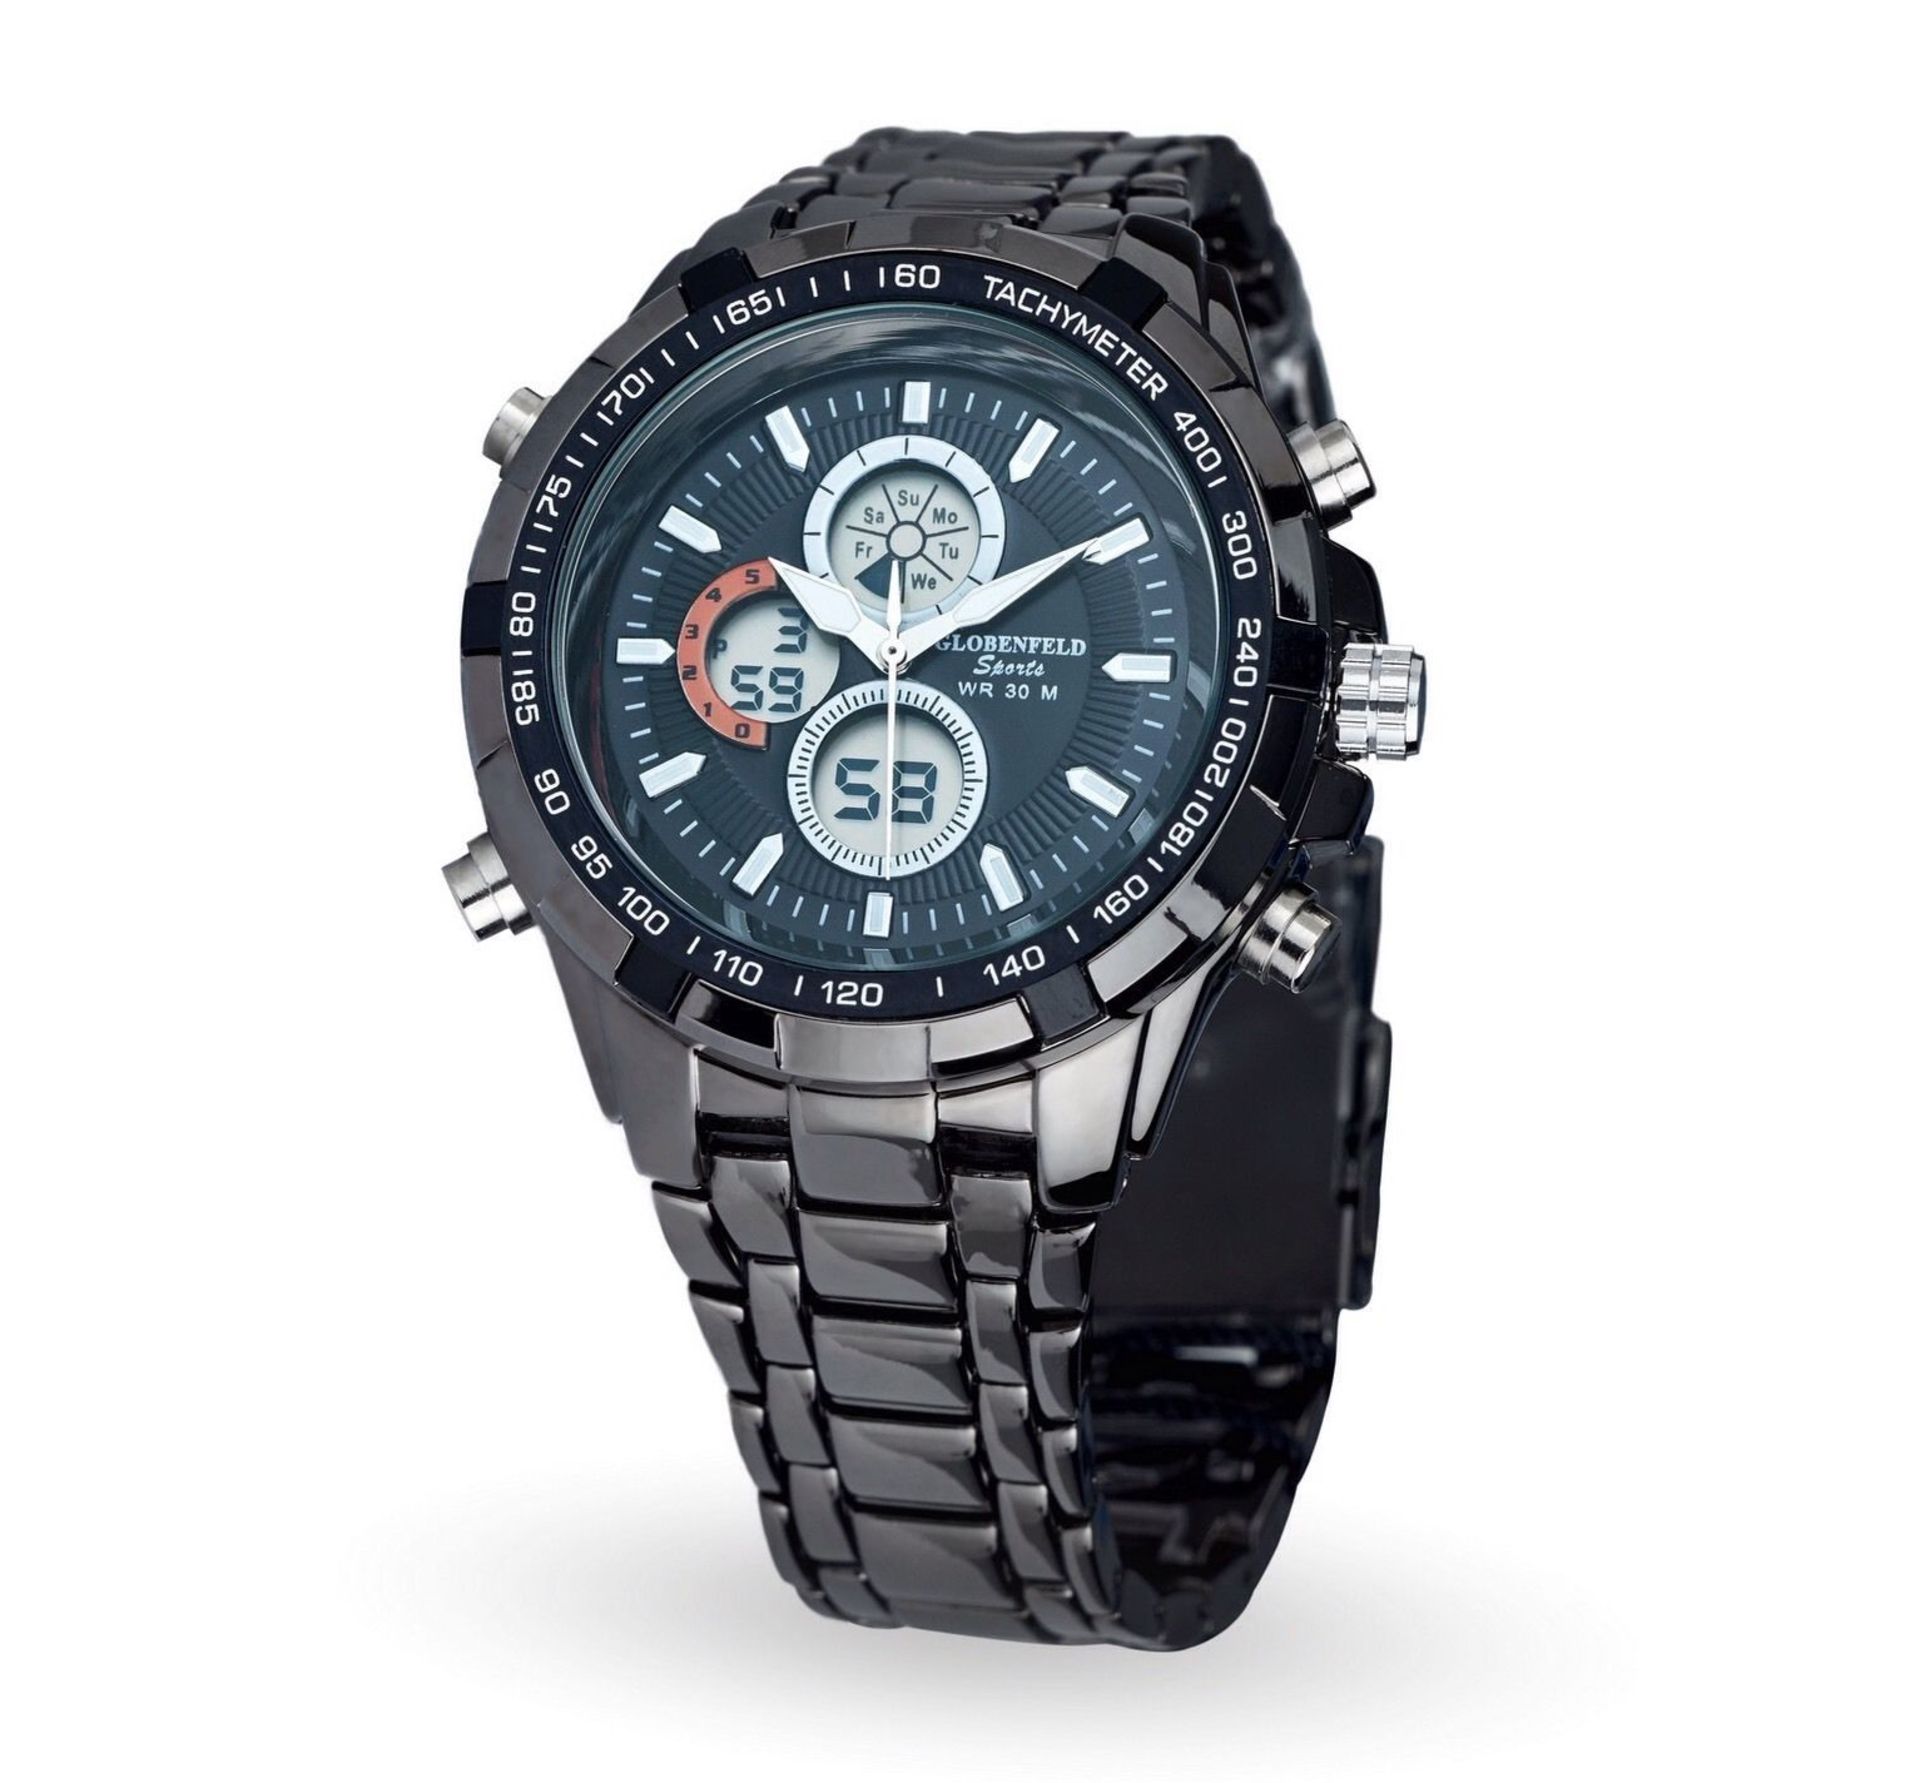 V Brand New Gents Globenfeld Black/Blue Limited Edition Super Sport Watch - Water Resistant to 30